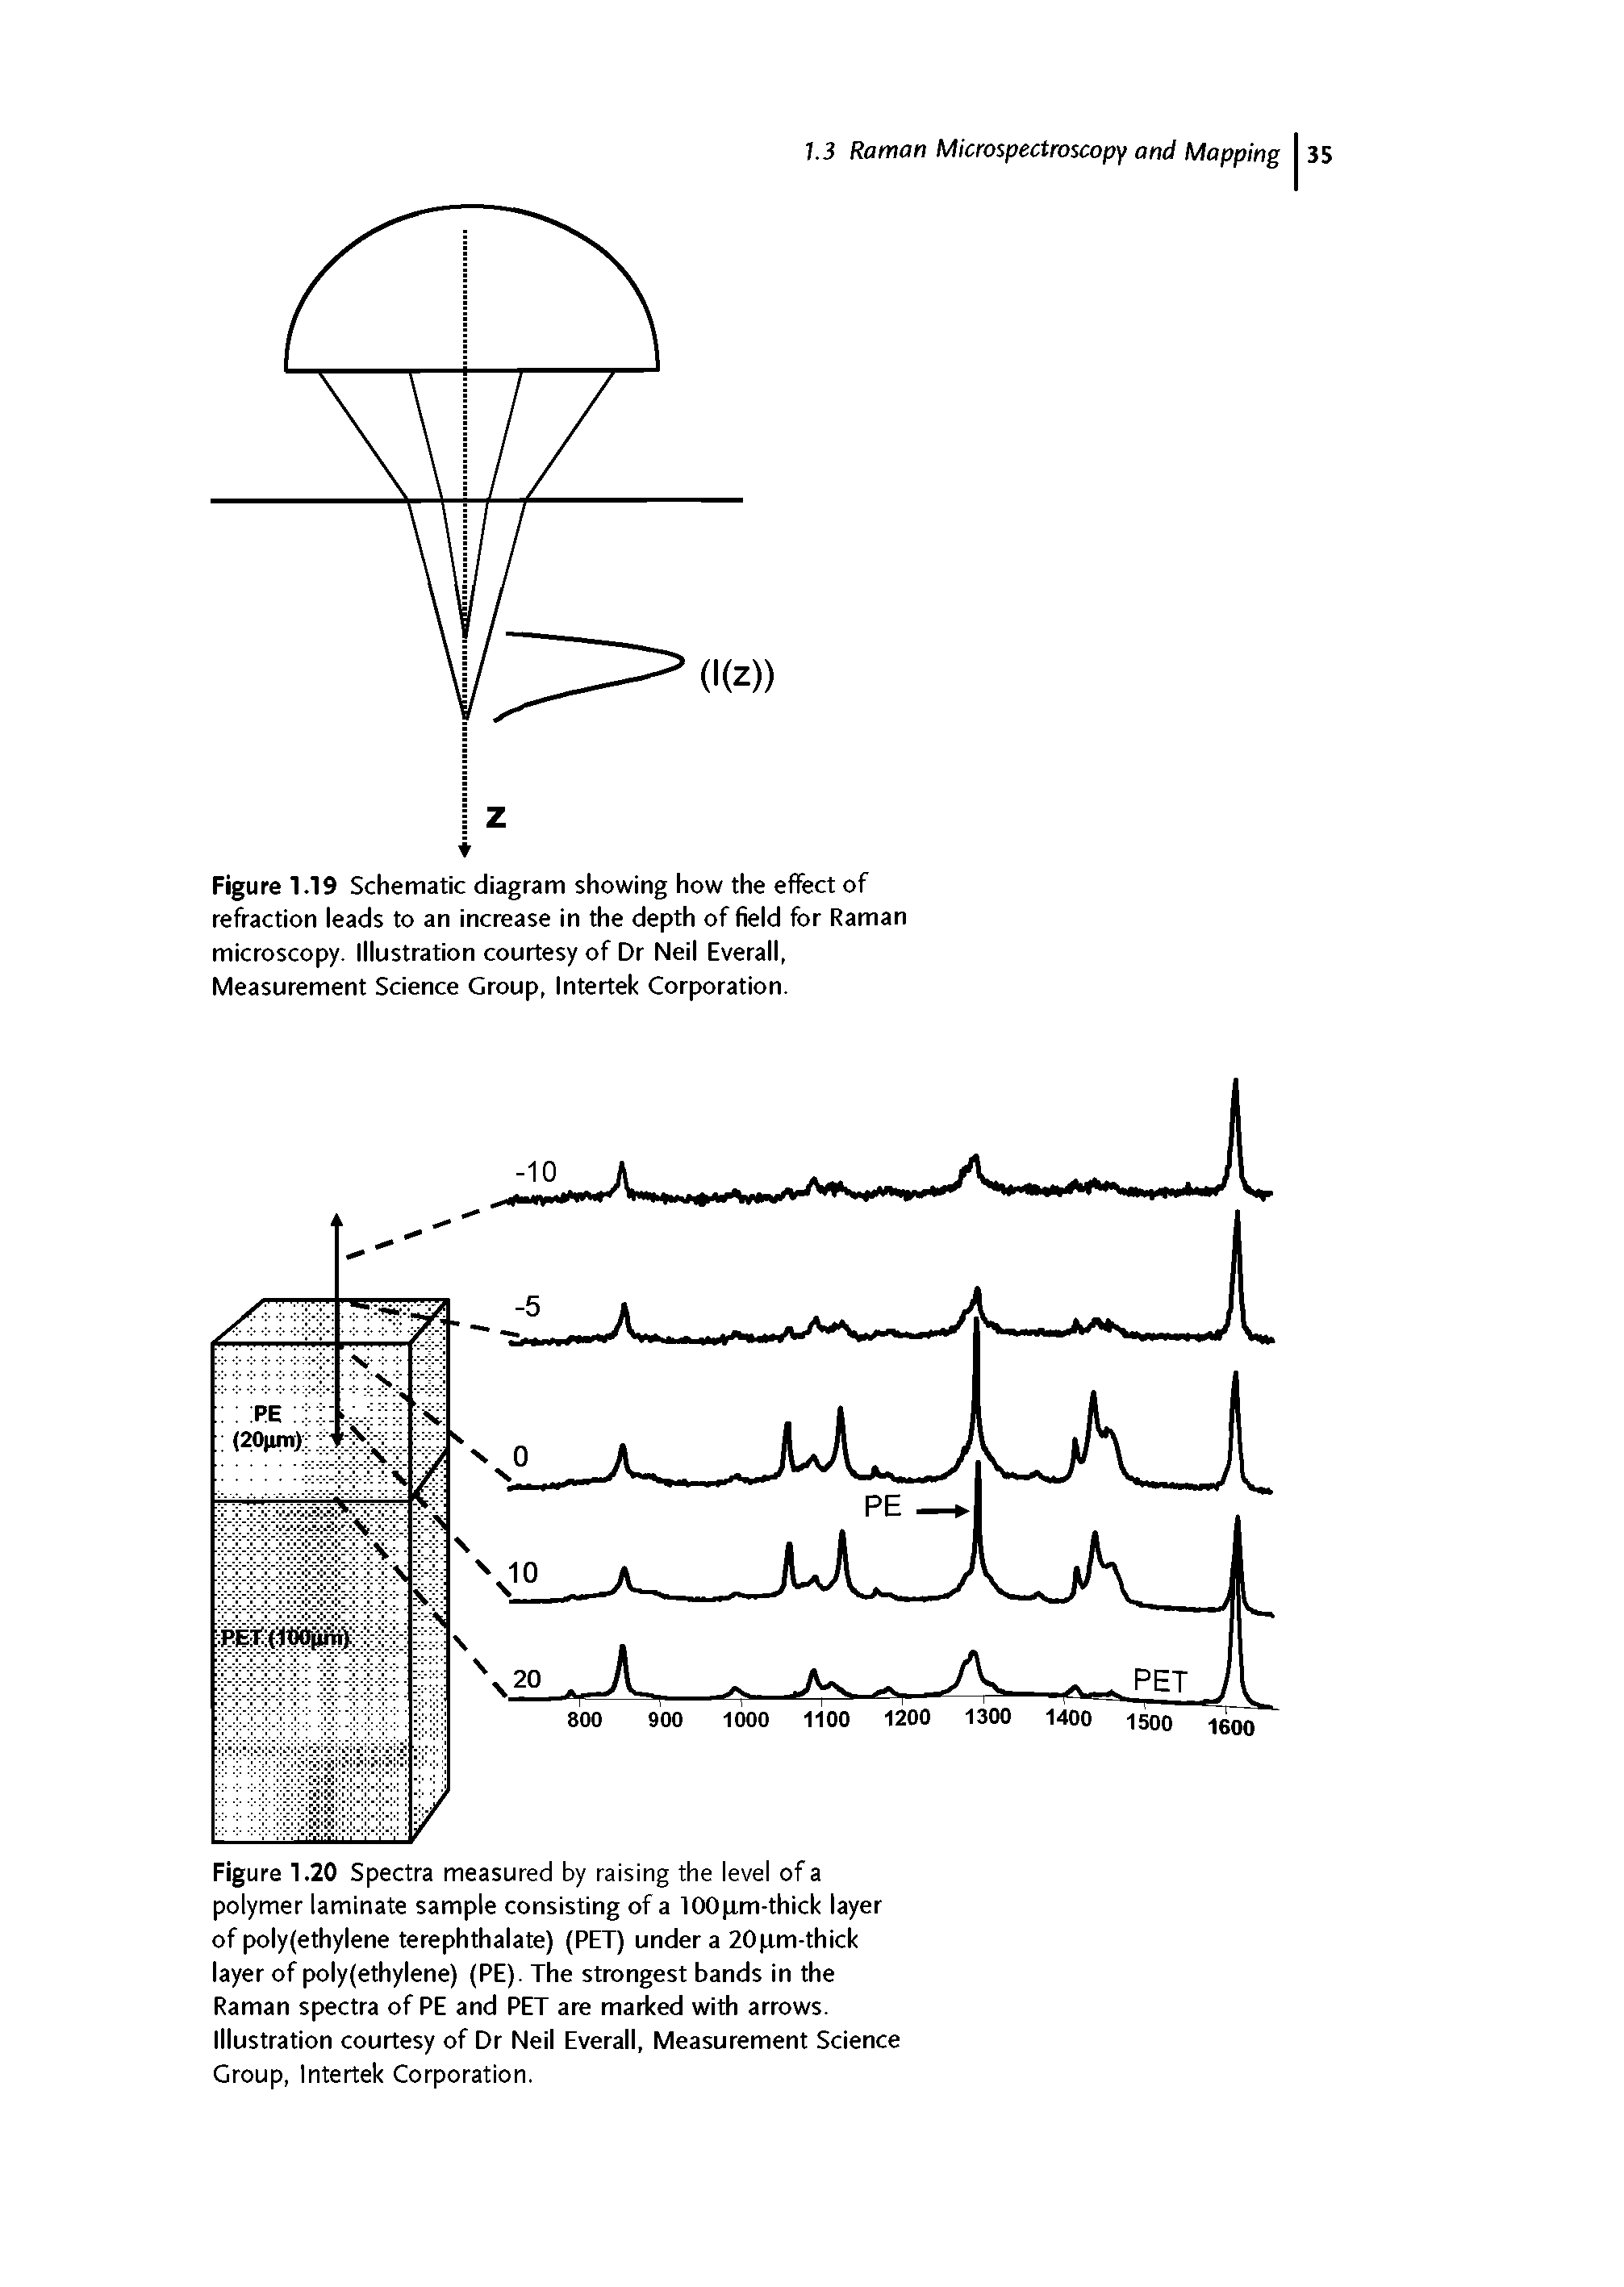 Figure 1.20 Spectra measured by raising the level of a polymer laminate sample consisting of a lOOpm-thick layer of polyfethylene terephthalate) (PET) under a 20pm-thick layer of poly(ethylene) (PE). The strongest bands in the Raman spectra of PE and PET are marked with arrows. Illustration courtesy of Dr Neil Everall, Measurement Science Croup, Intertek Corporation.